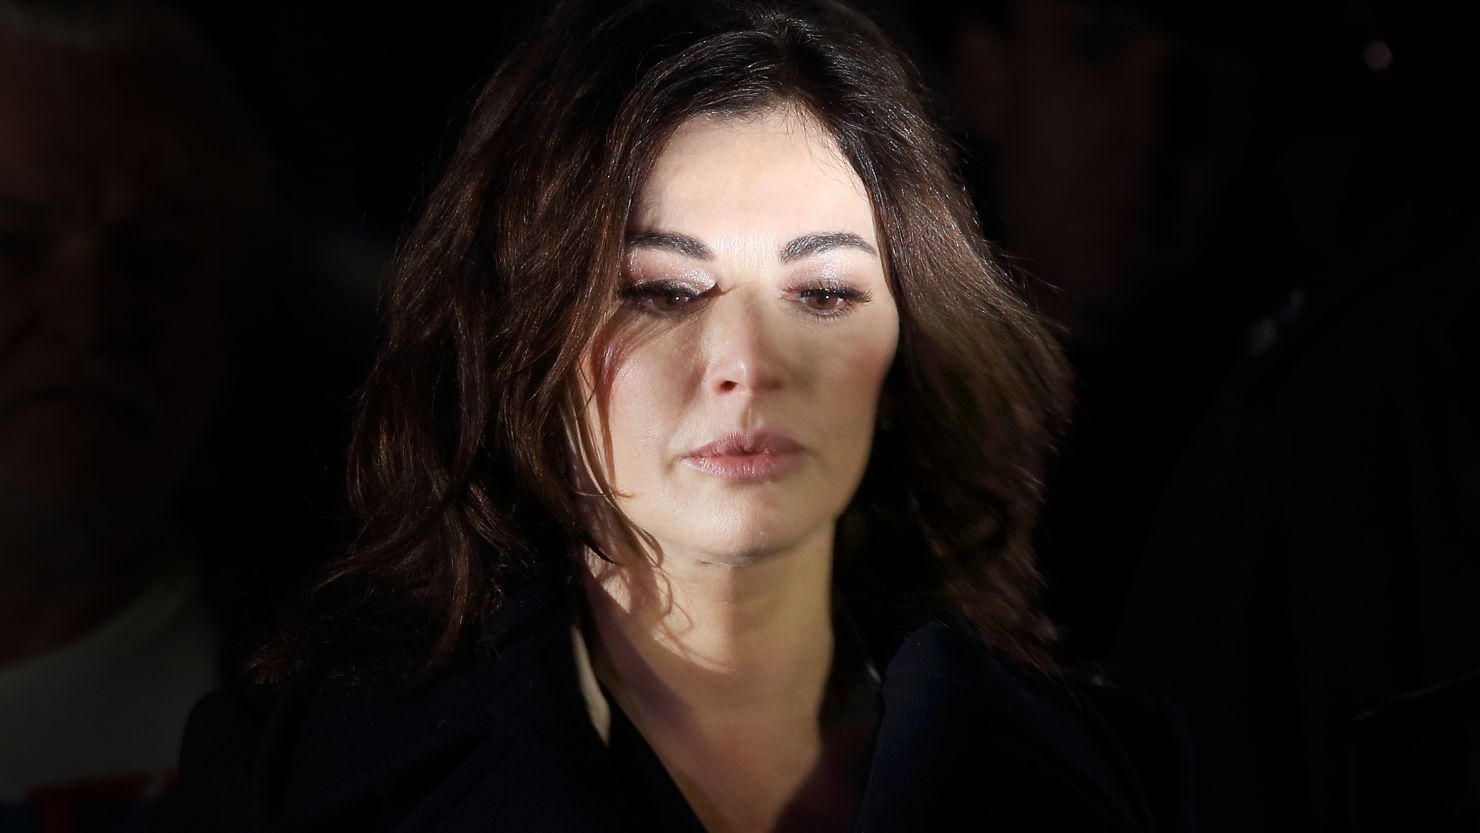 Nigella Lawson leaves court last week in Isleworth, England, after testifying for the prosecution.